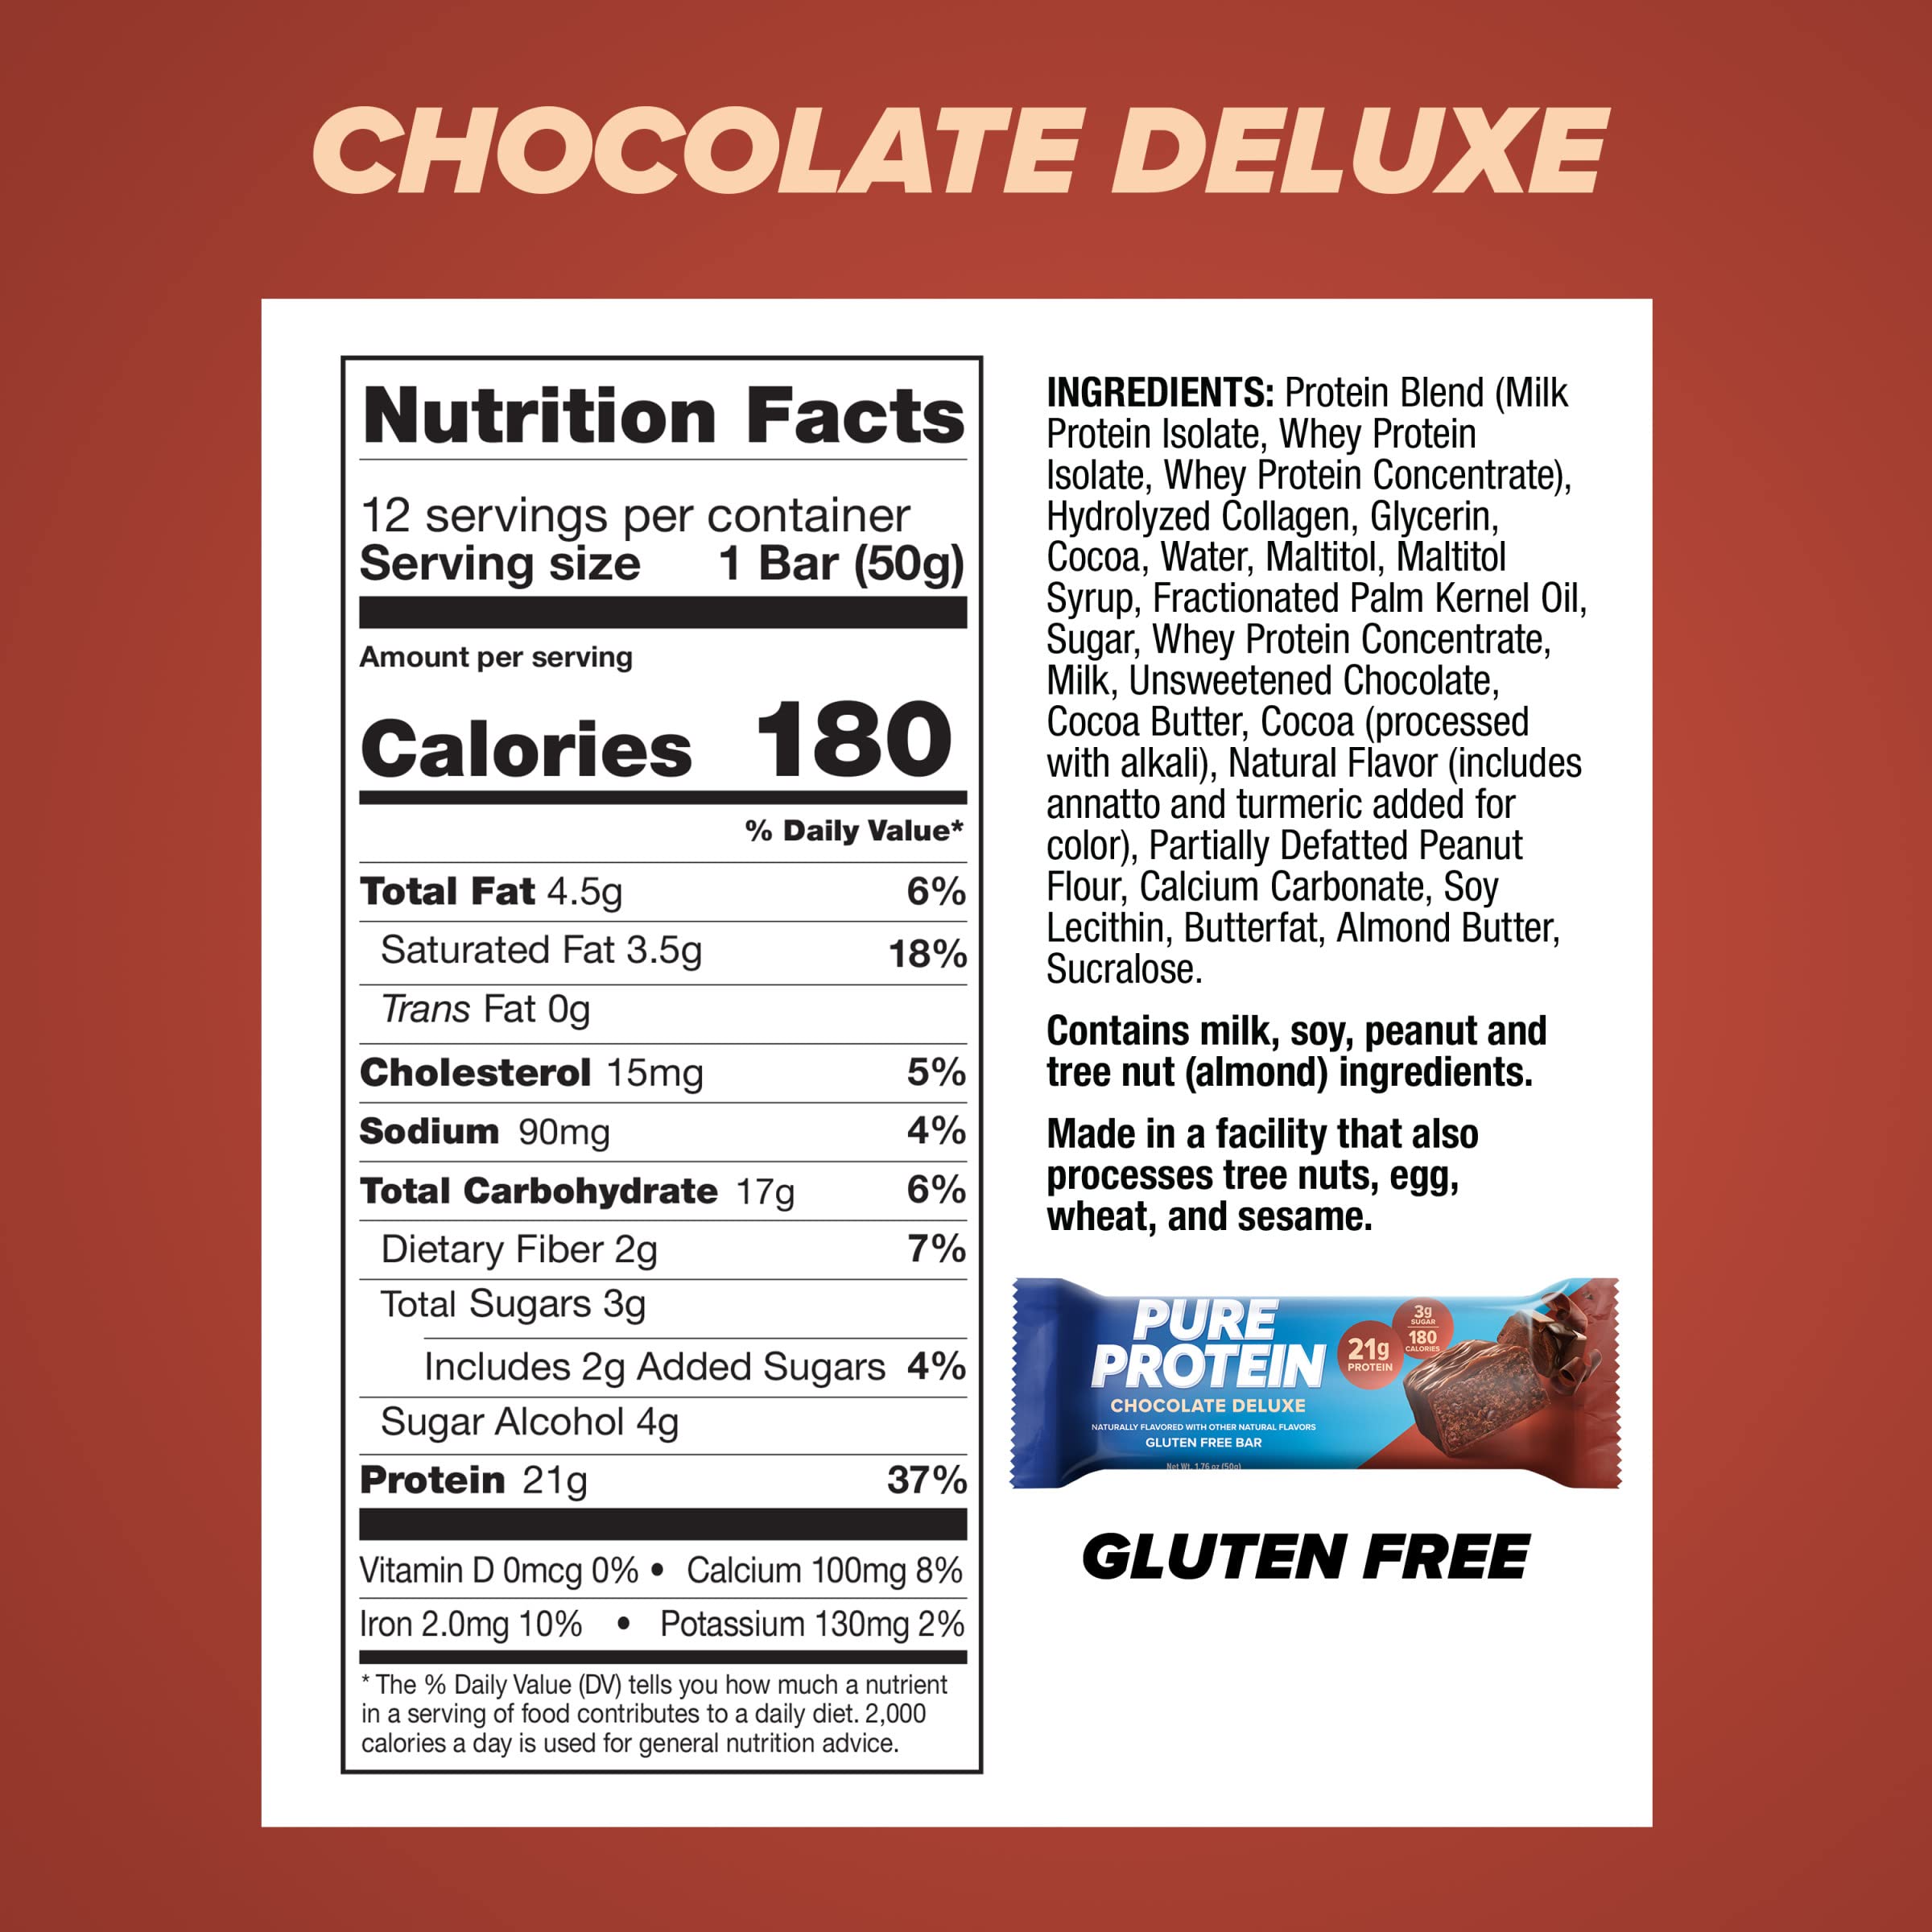 Pure Protein Bars, High Protein, Nutritious Snacks to Support Energy, Low Sugar, Gluten Free, Chocolate Deluxe, 1.76 oz., 12 Count(Pack of 1) (Packaging may vary)